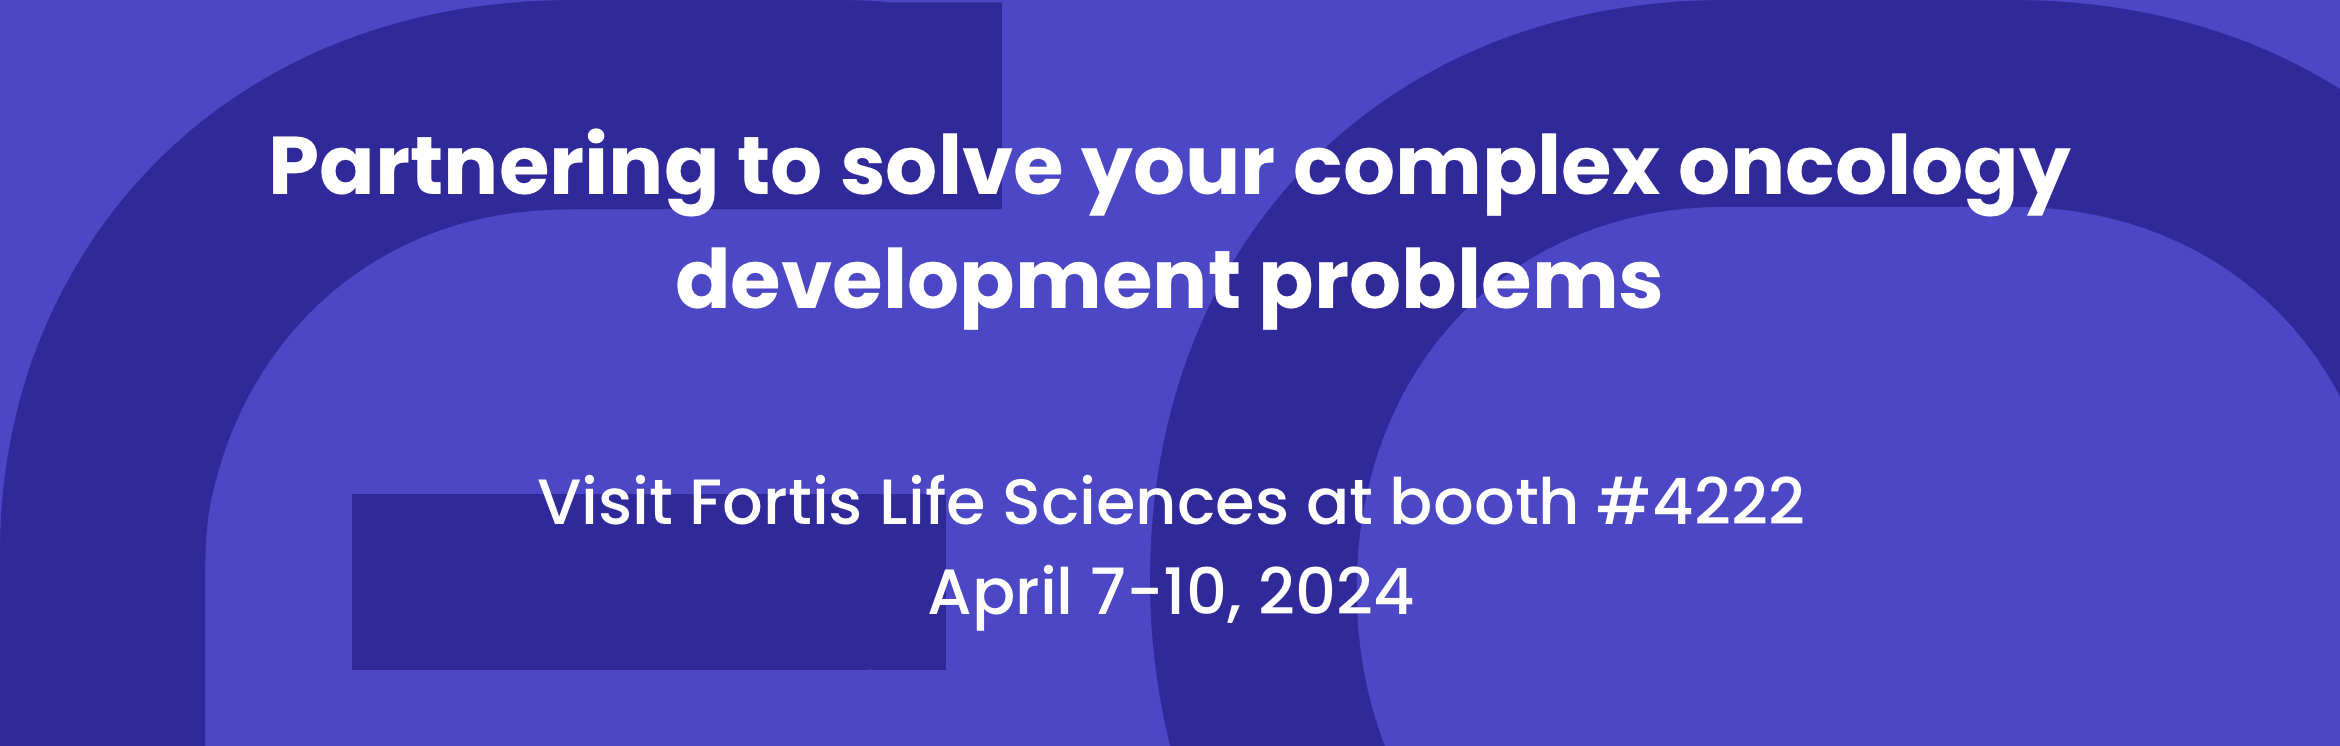 Partnering to solve your complex oncology development problems
Visit Fortis Life Sciences at booth #4222
April 7-10, 2024